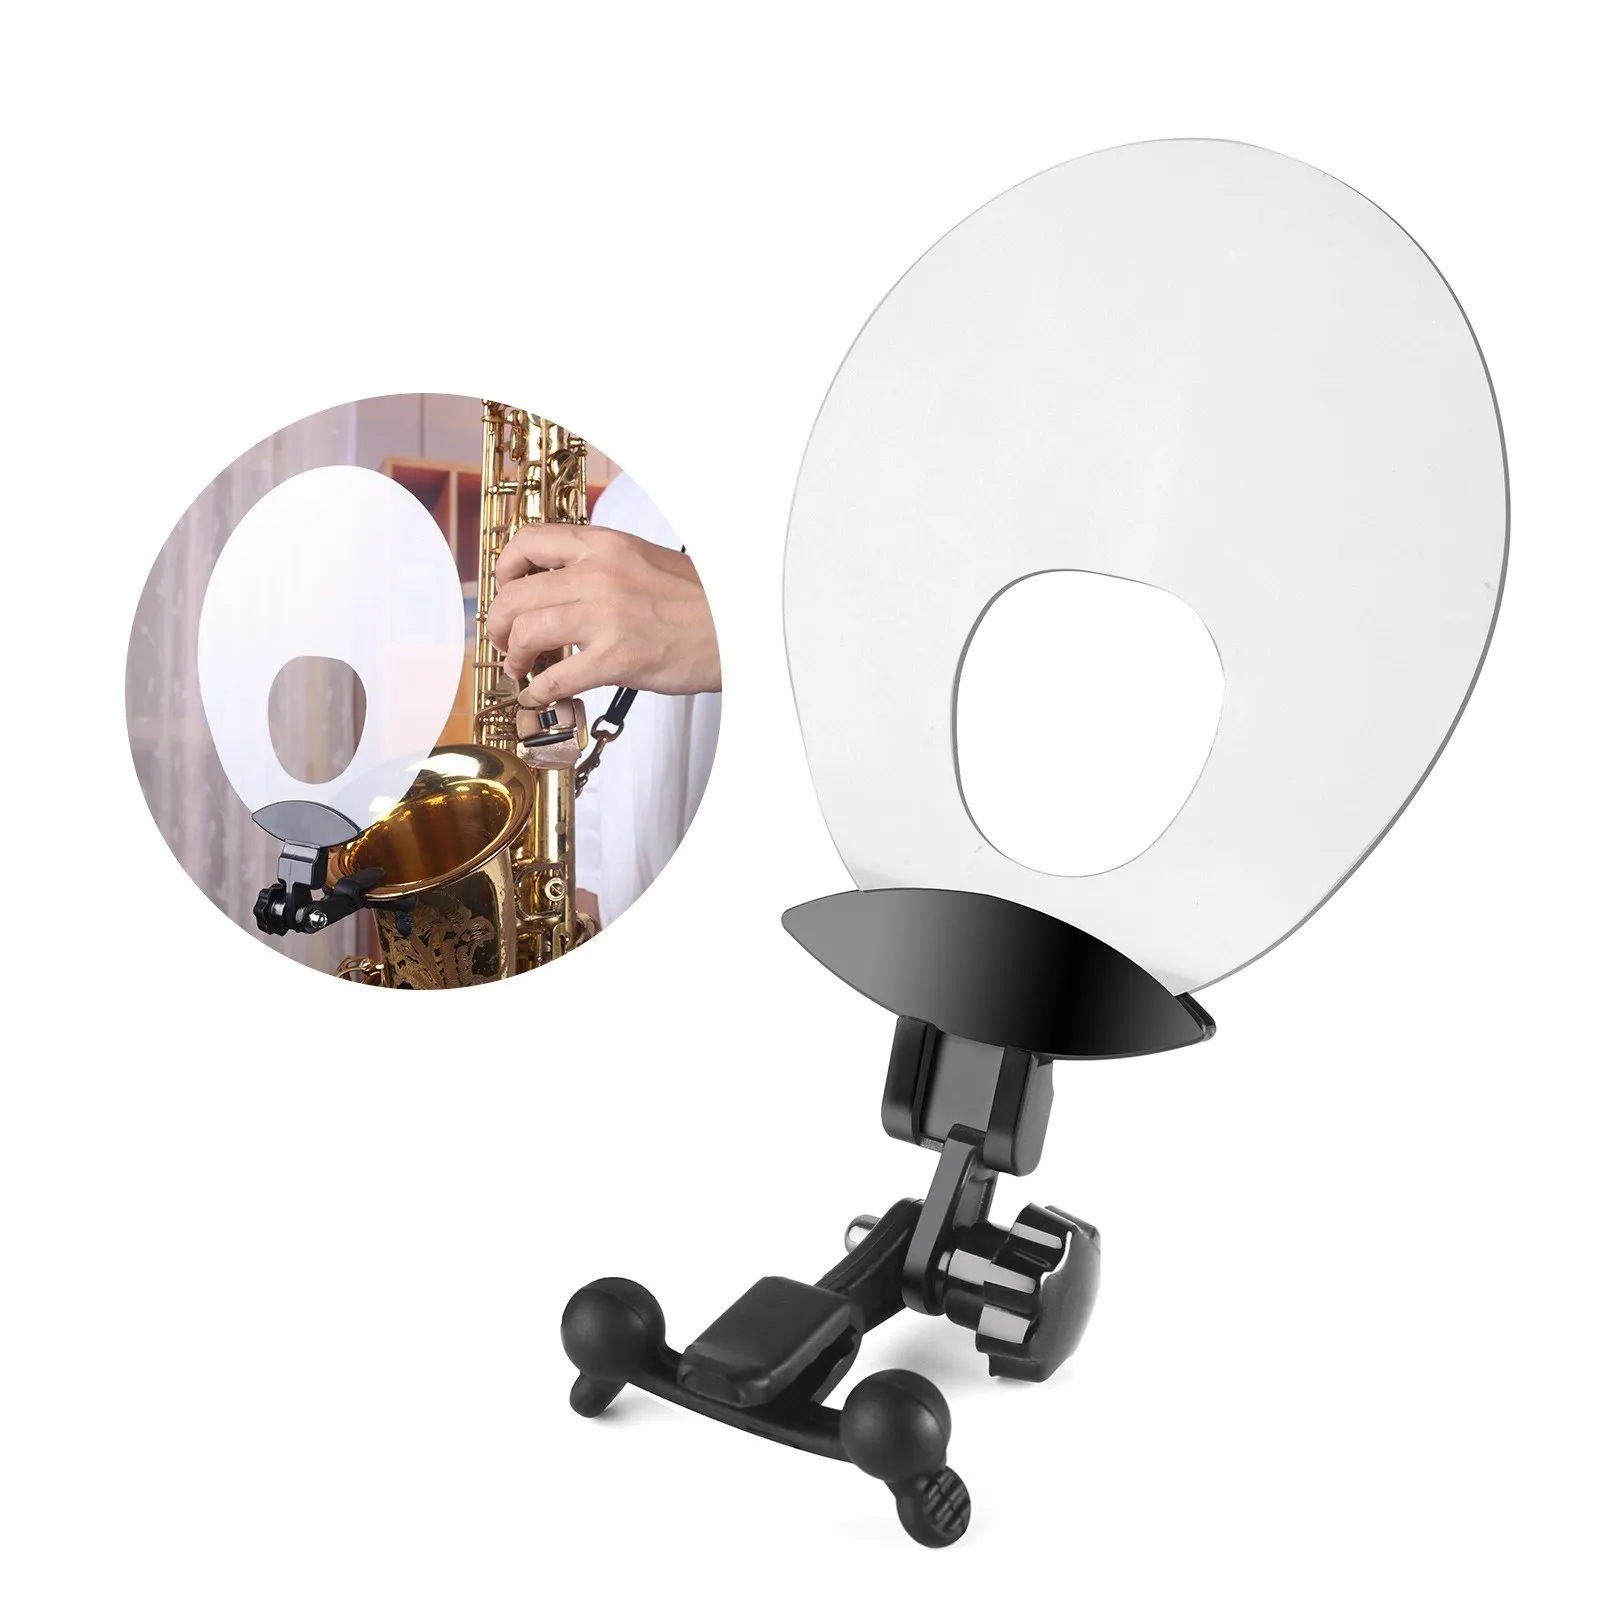 
Plastic Saxophone Deflector Sound Deflector Shield with Mute & Reflect Sound Functions for Wind Instrument 